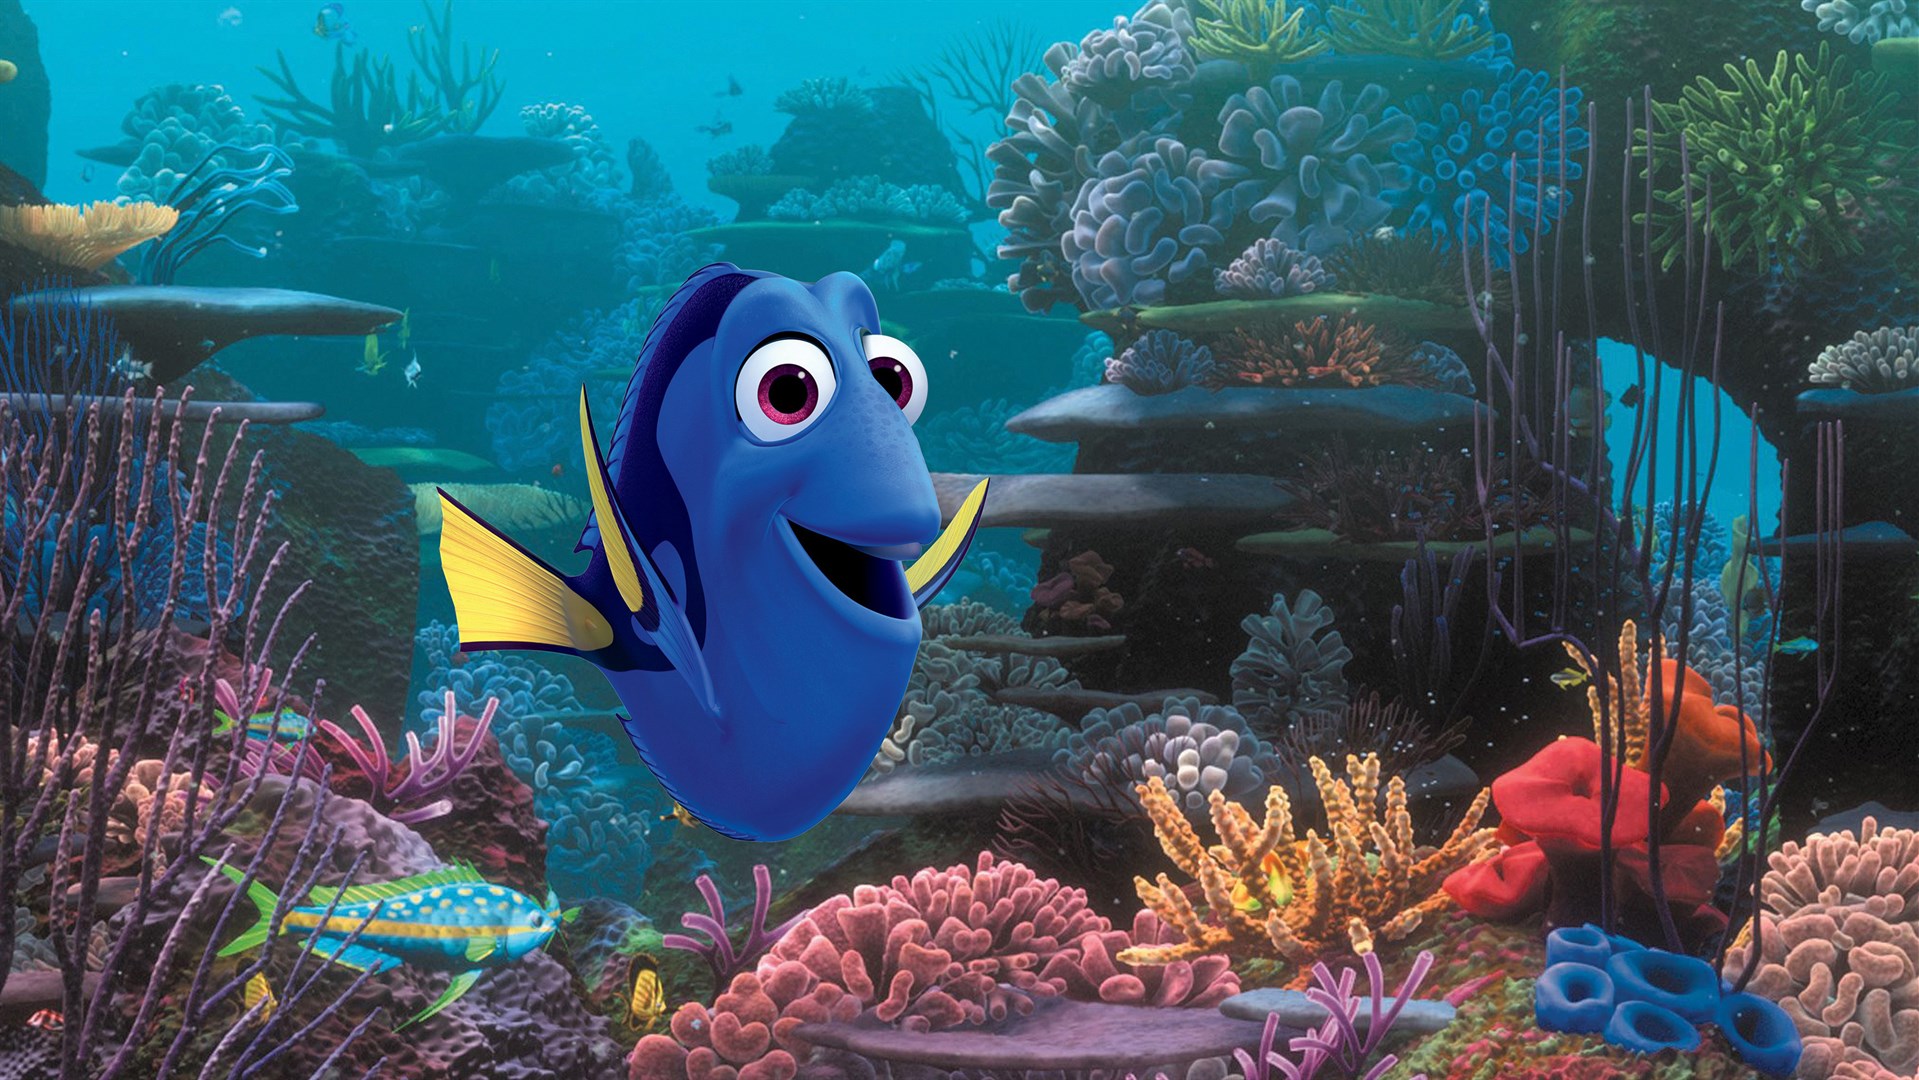 Finding Dory.